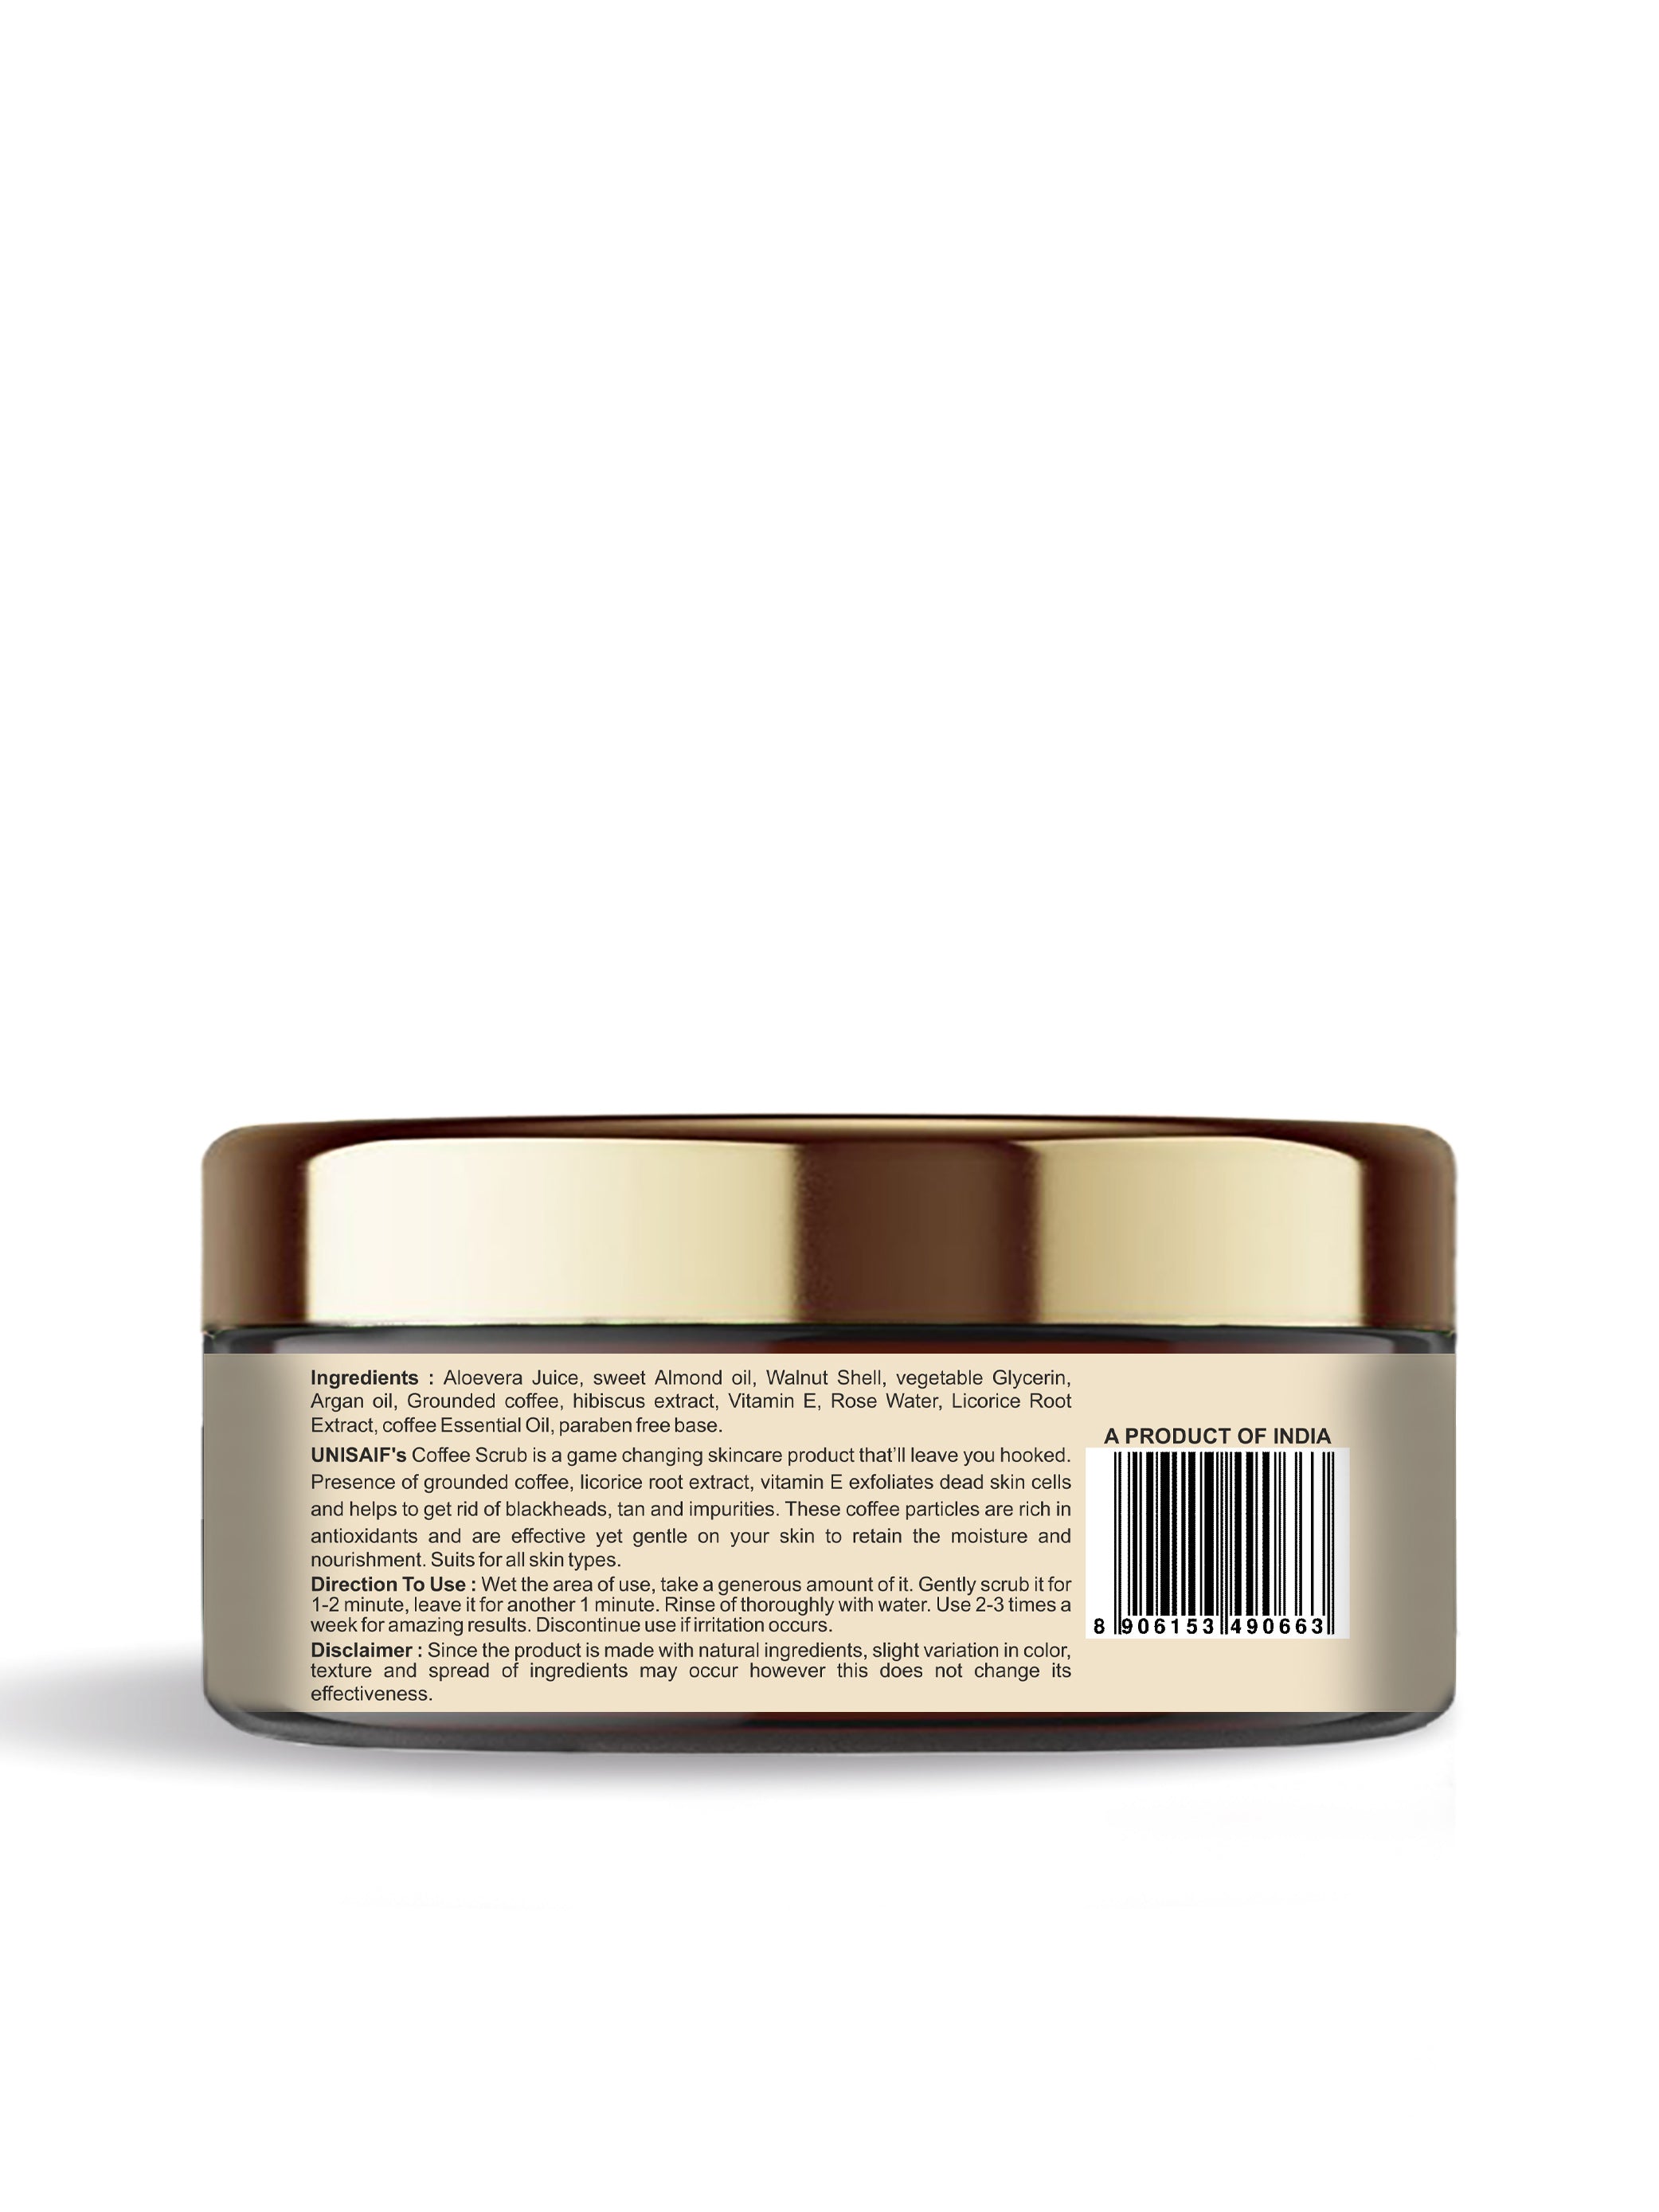 Coffee Organic Scrub (50g) With Rose Oil For |De tan| Exfoliation| Hydration| Cleansing